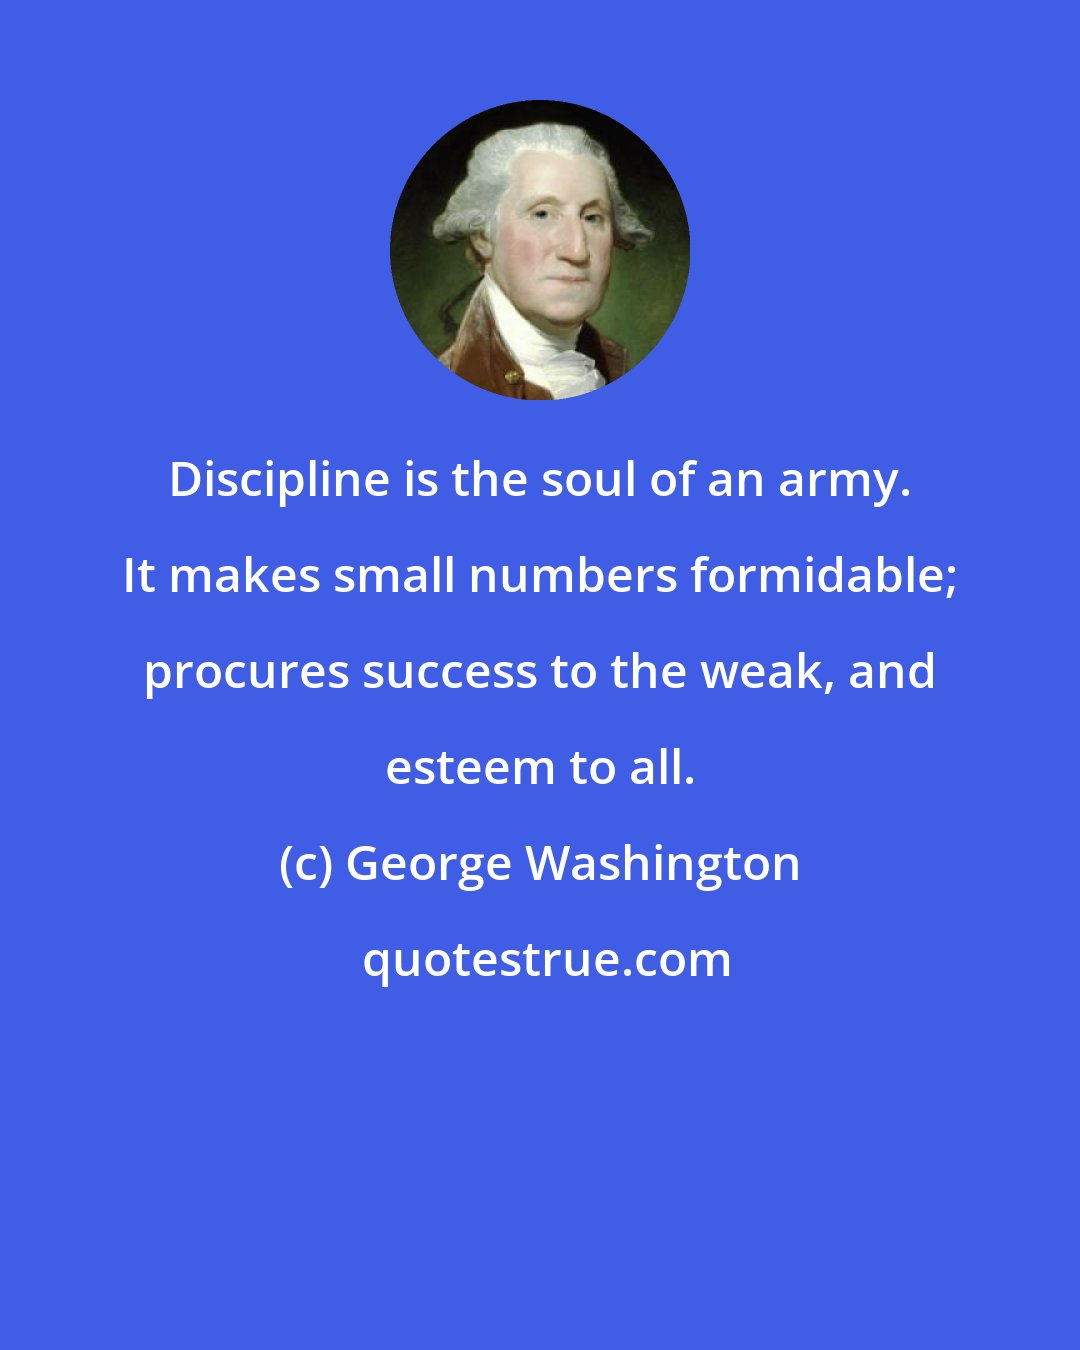 George Washington: Discipline is the soul of an army. It makes small numbers formidable; procures success to the weak, and esteem to all.